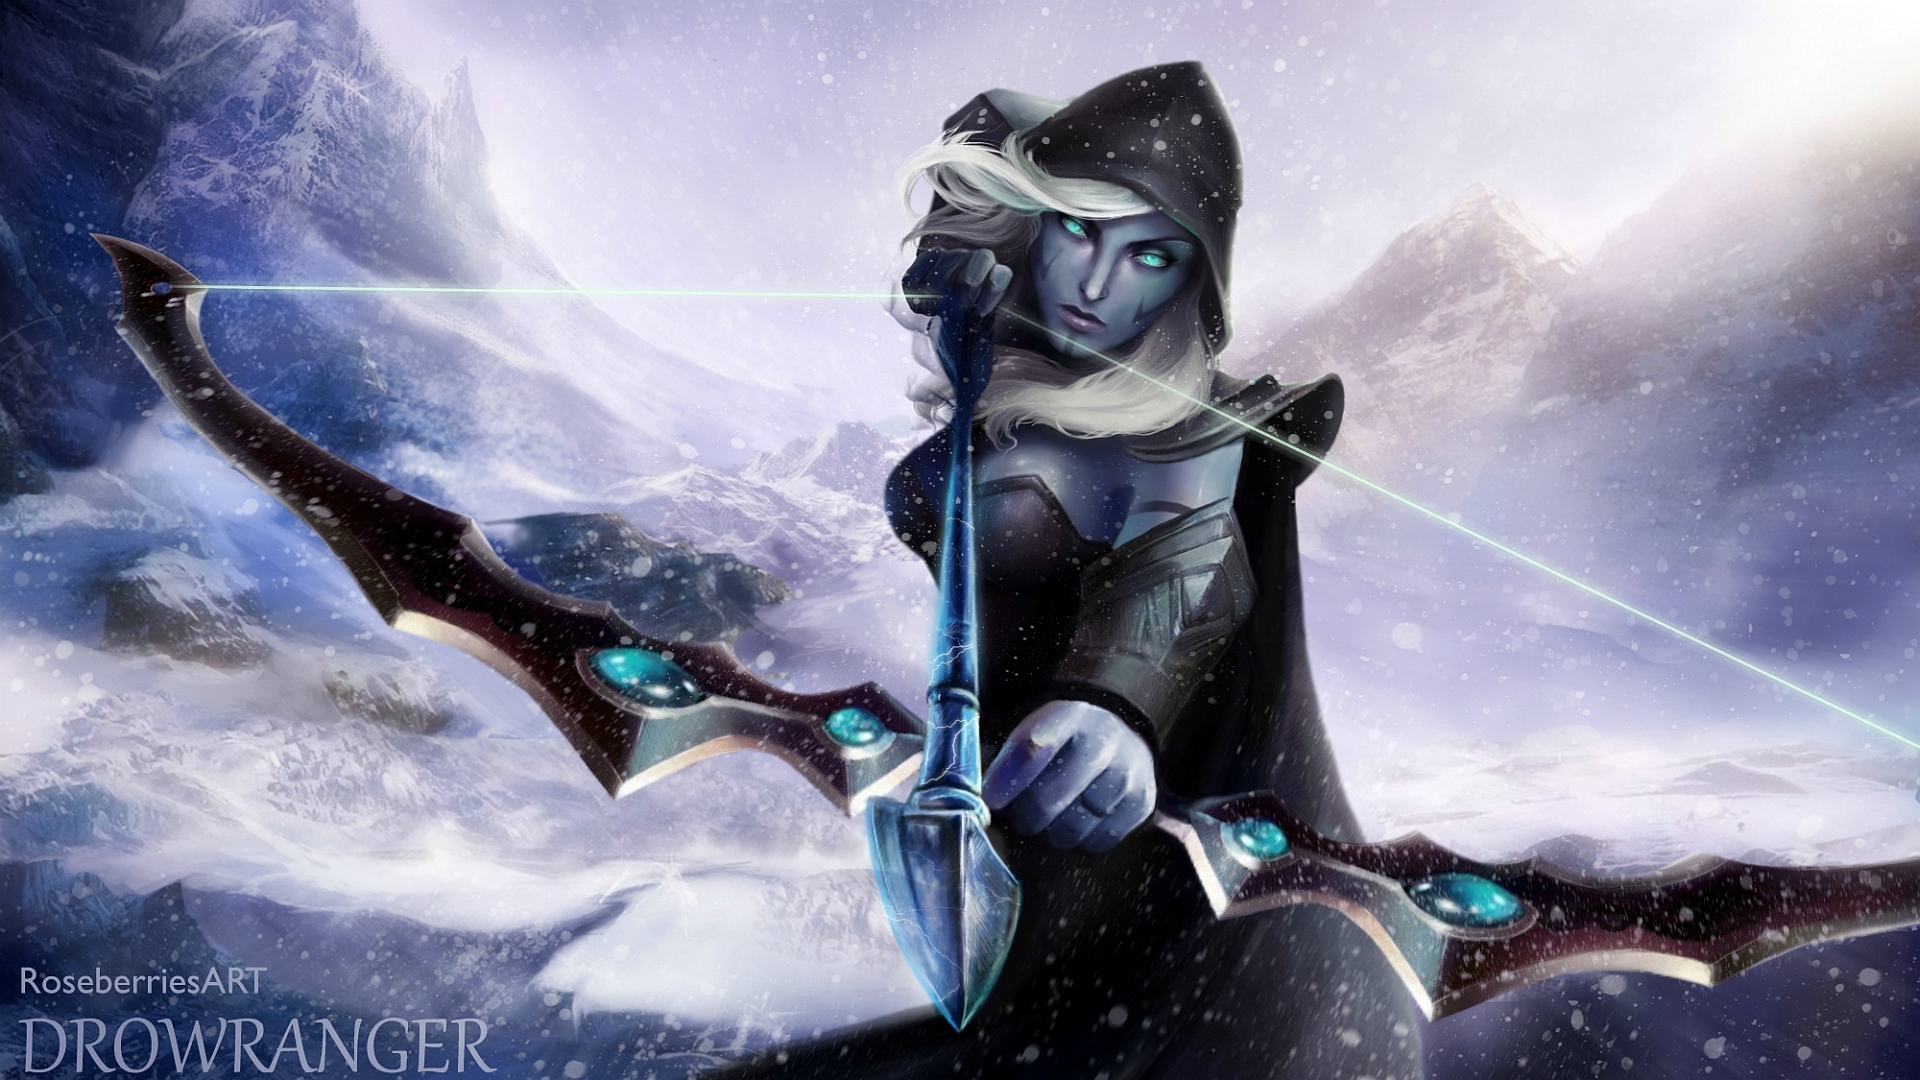 Drow Ranger (Dota 2) wallpapers for desktop, download free Drow Ranger  (Dota 2) pictures and backgrounds for PC 